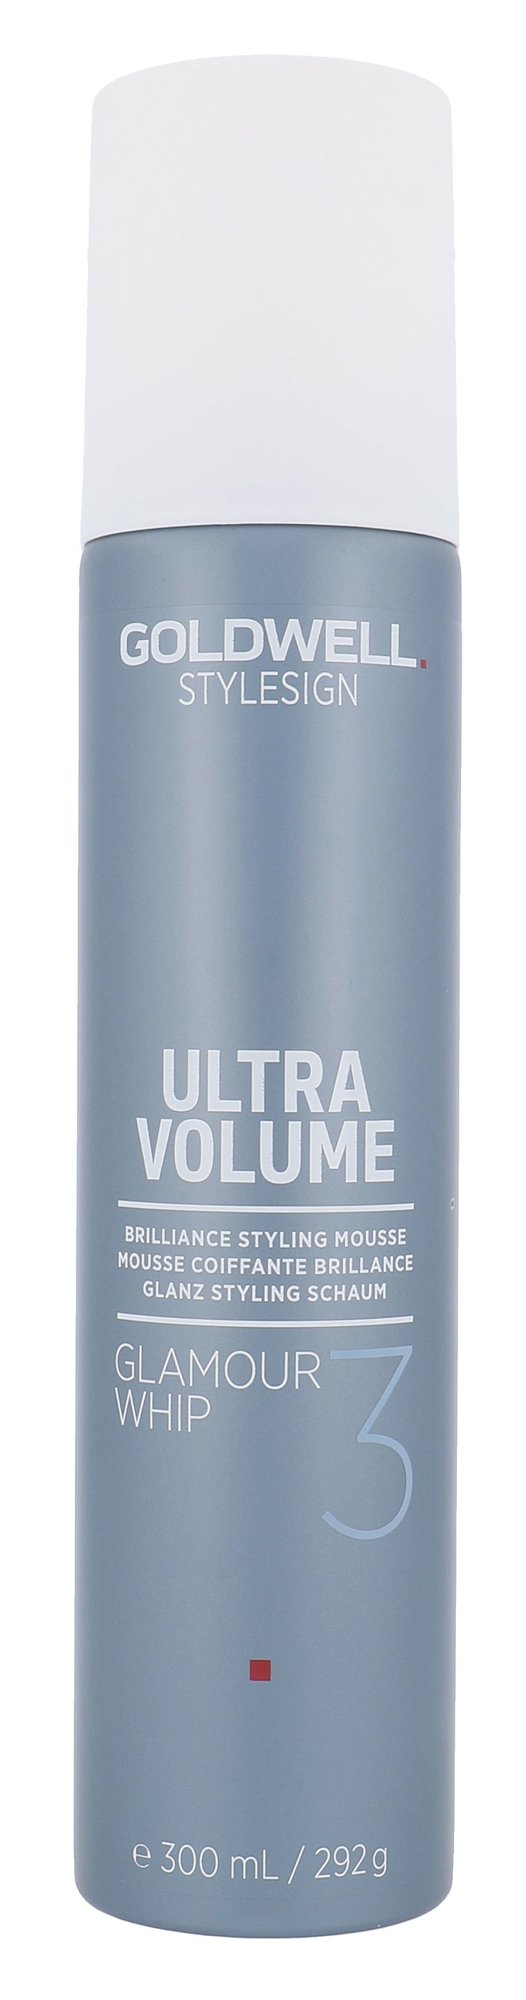 Goldwell Style Sign Ultra Volume Glamour Whip